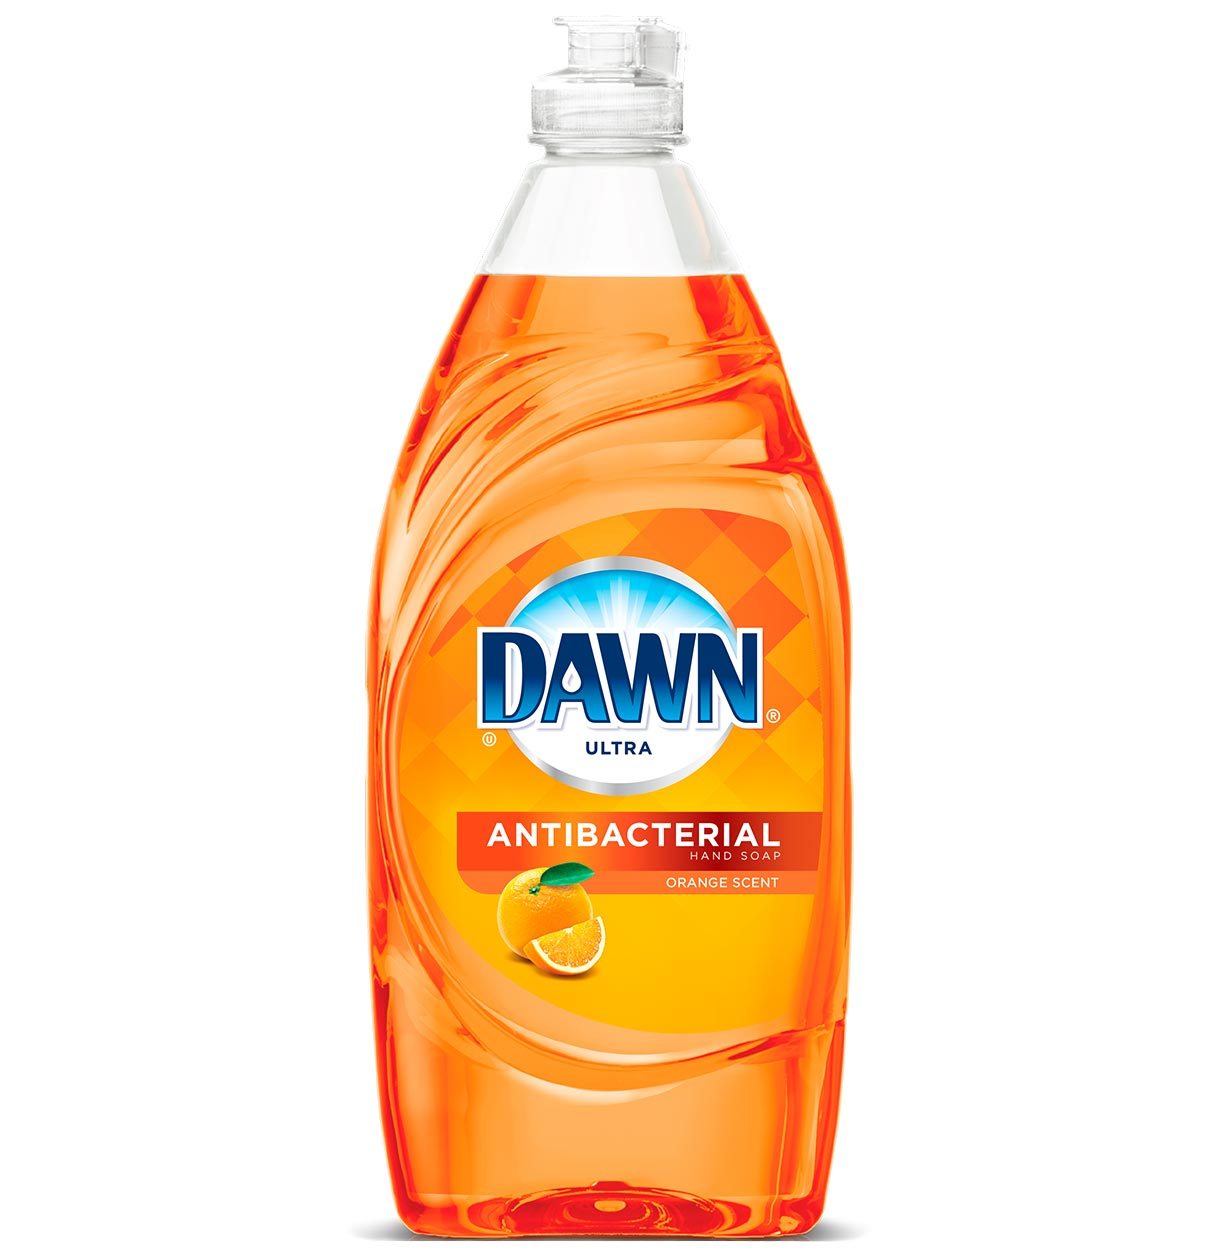 Dawn Ultra Antibacterial Hand Soap, Orange Scent, 8 fl oz Double Cleaning Power